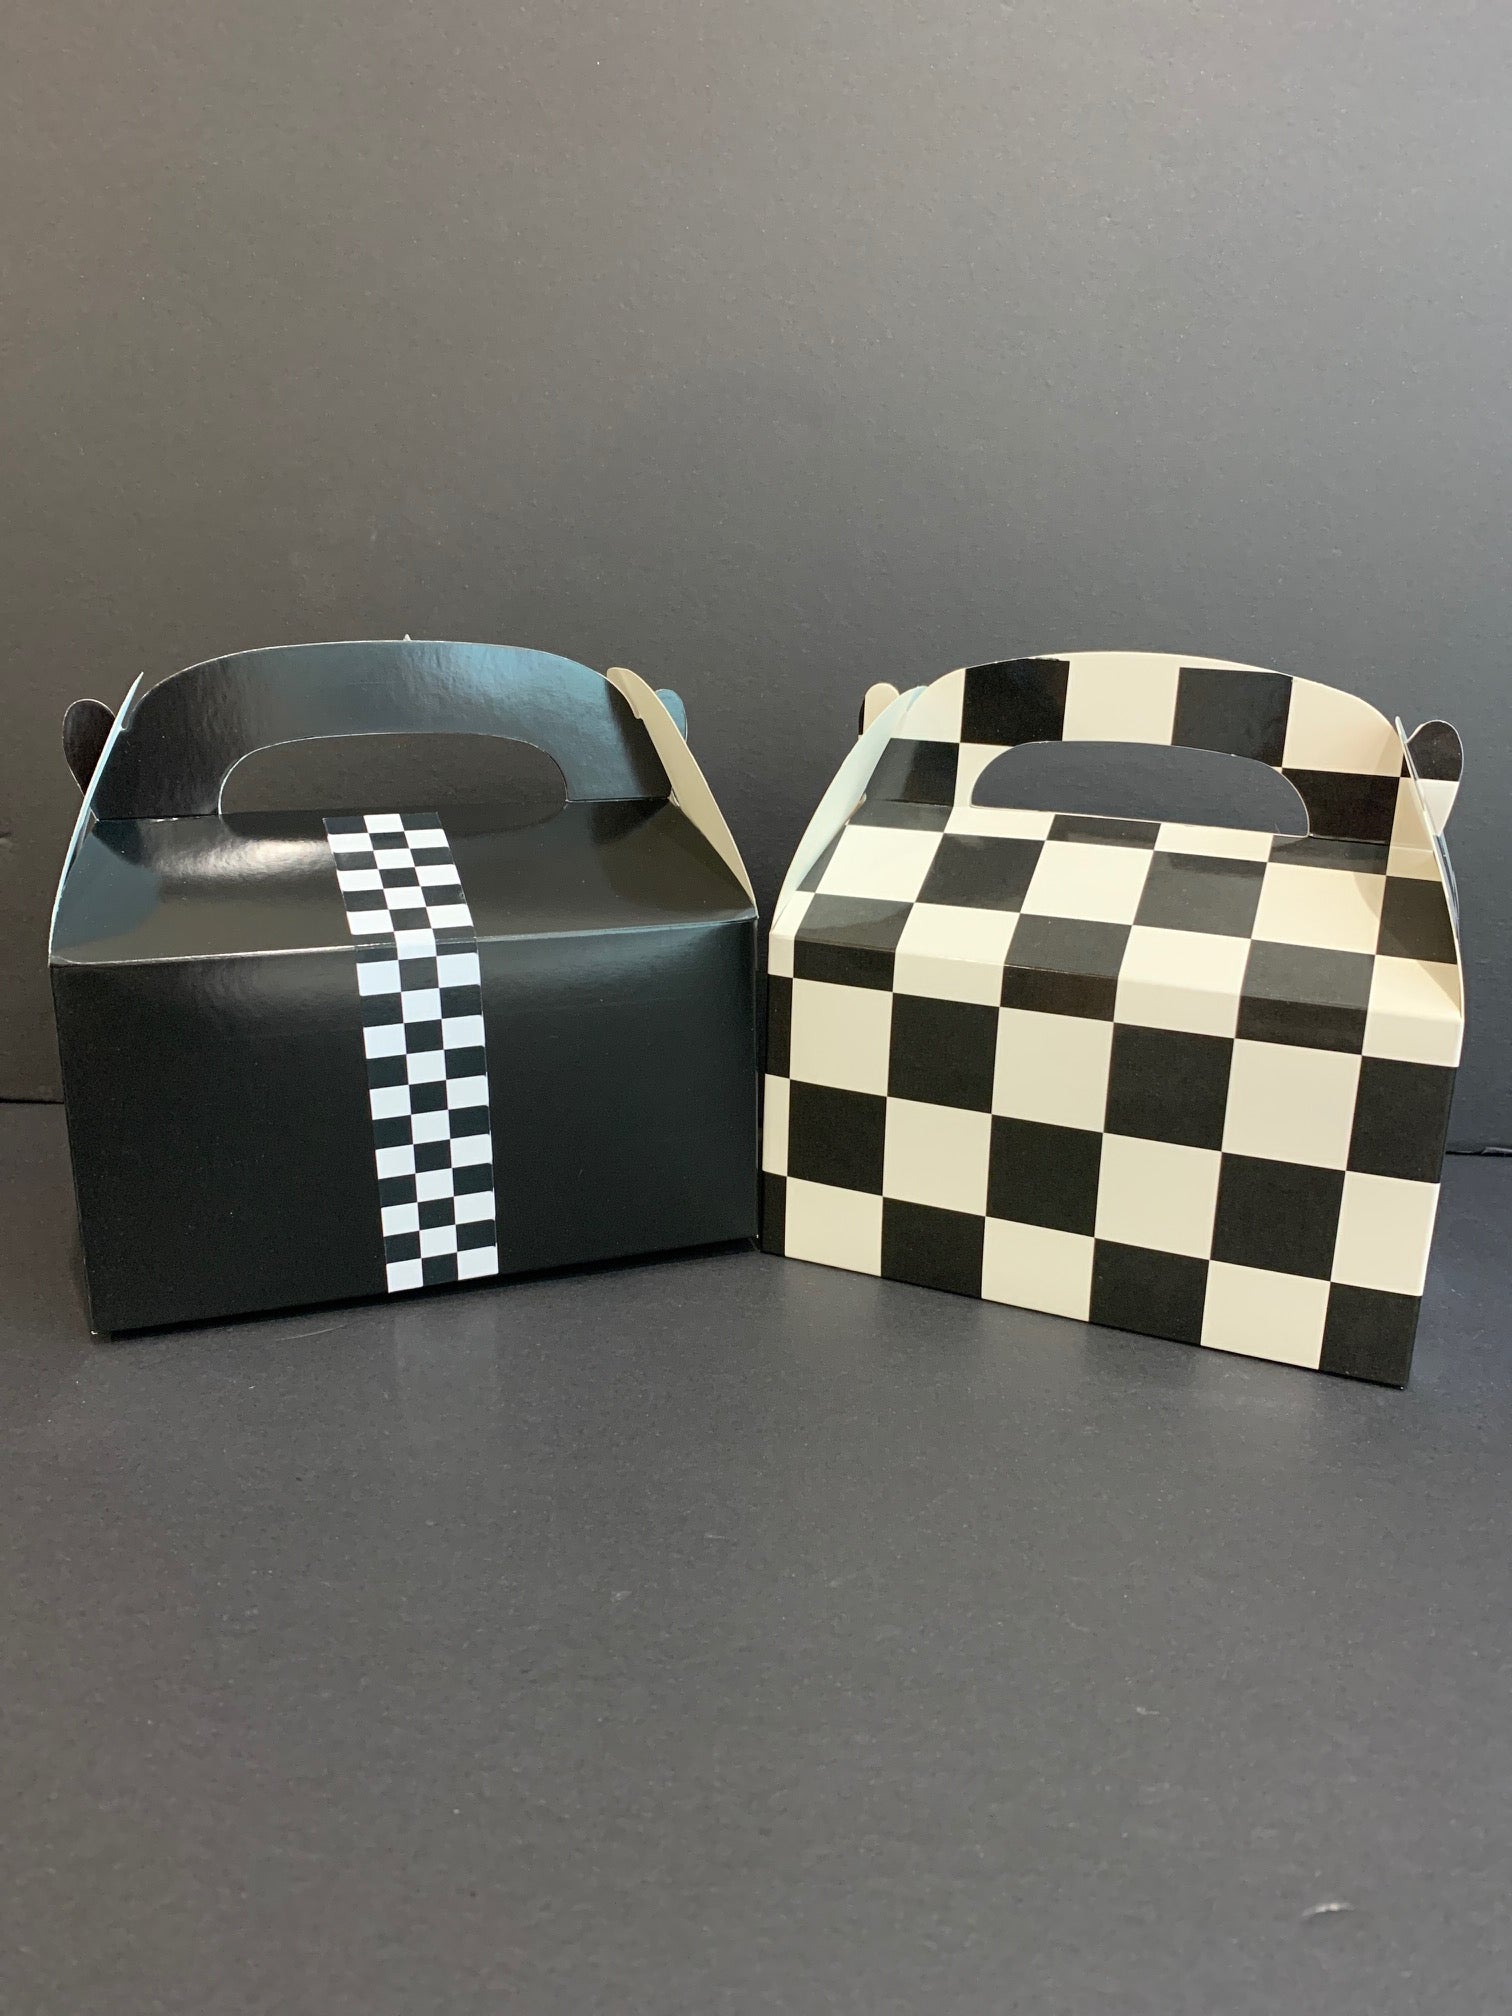 Racing party gift boxes